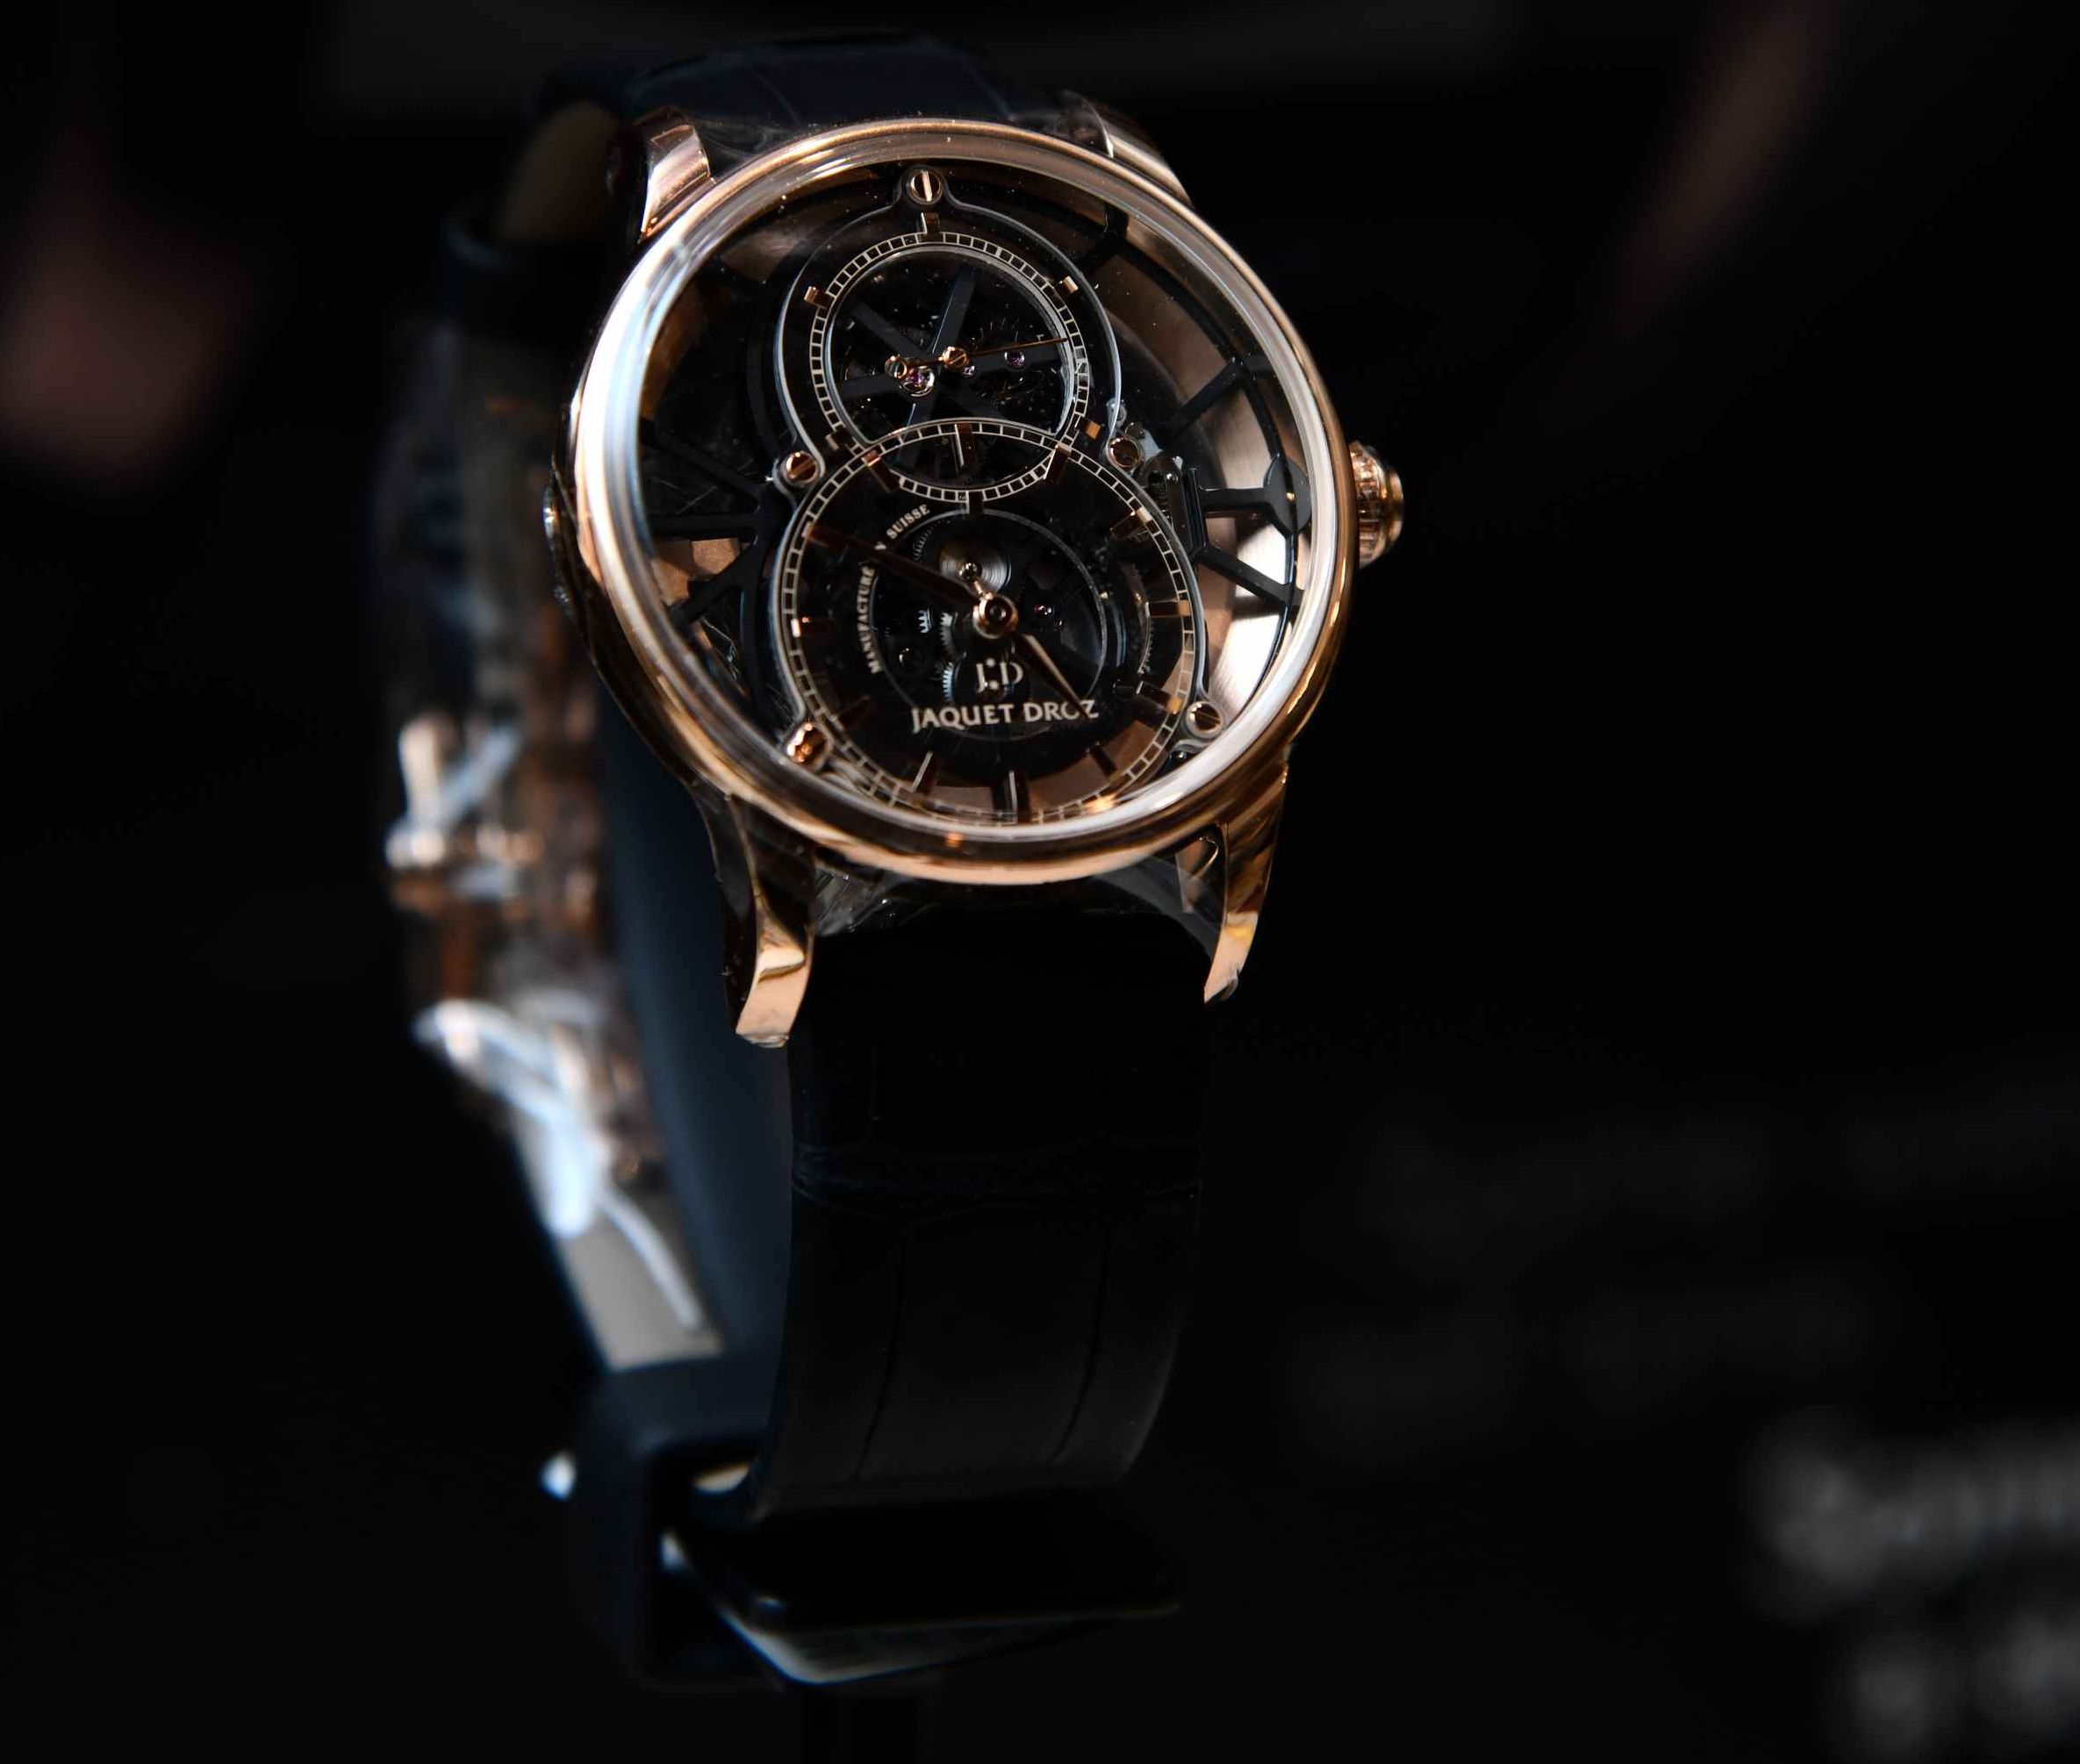 Also showcased for the first time in India, was the Grande Seconde Skelet-One Tourbillon